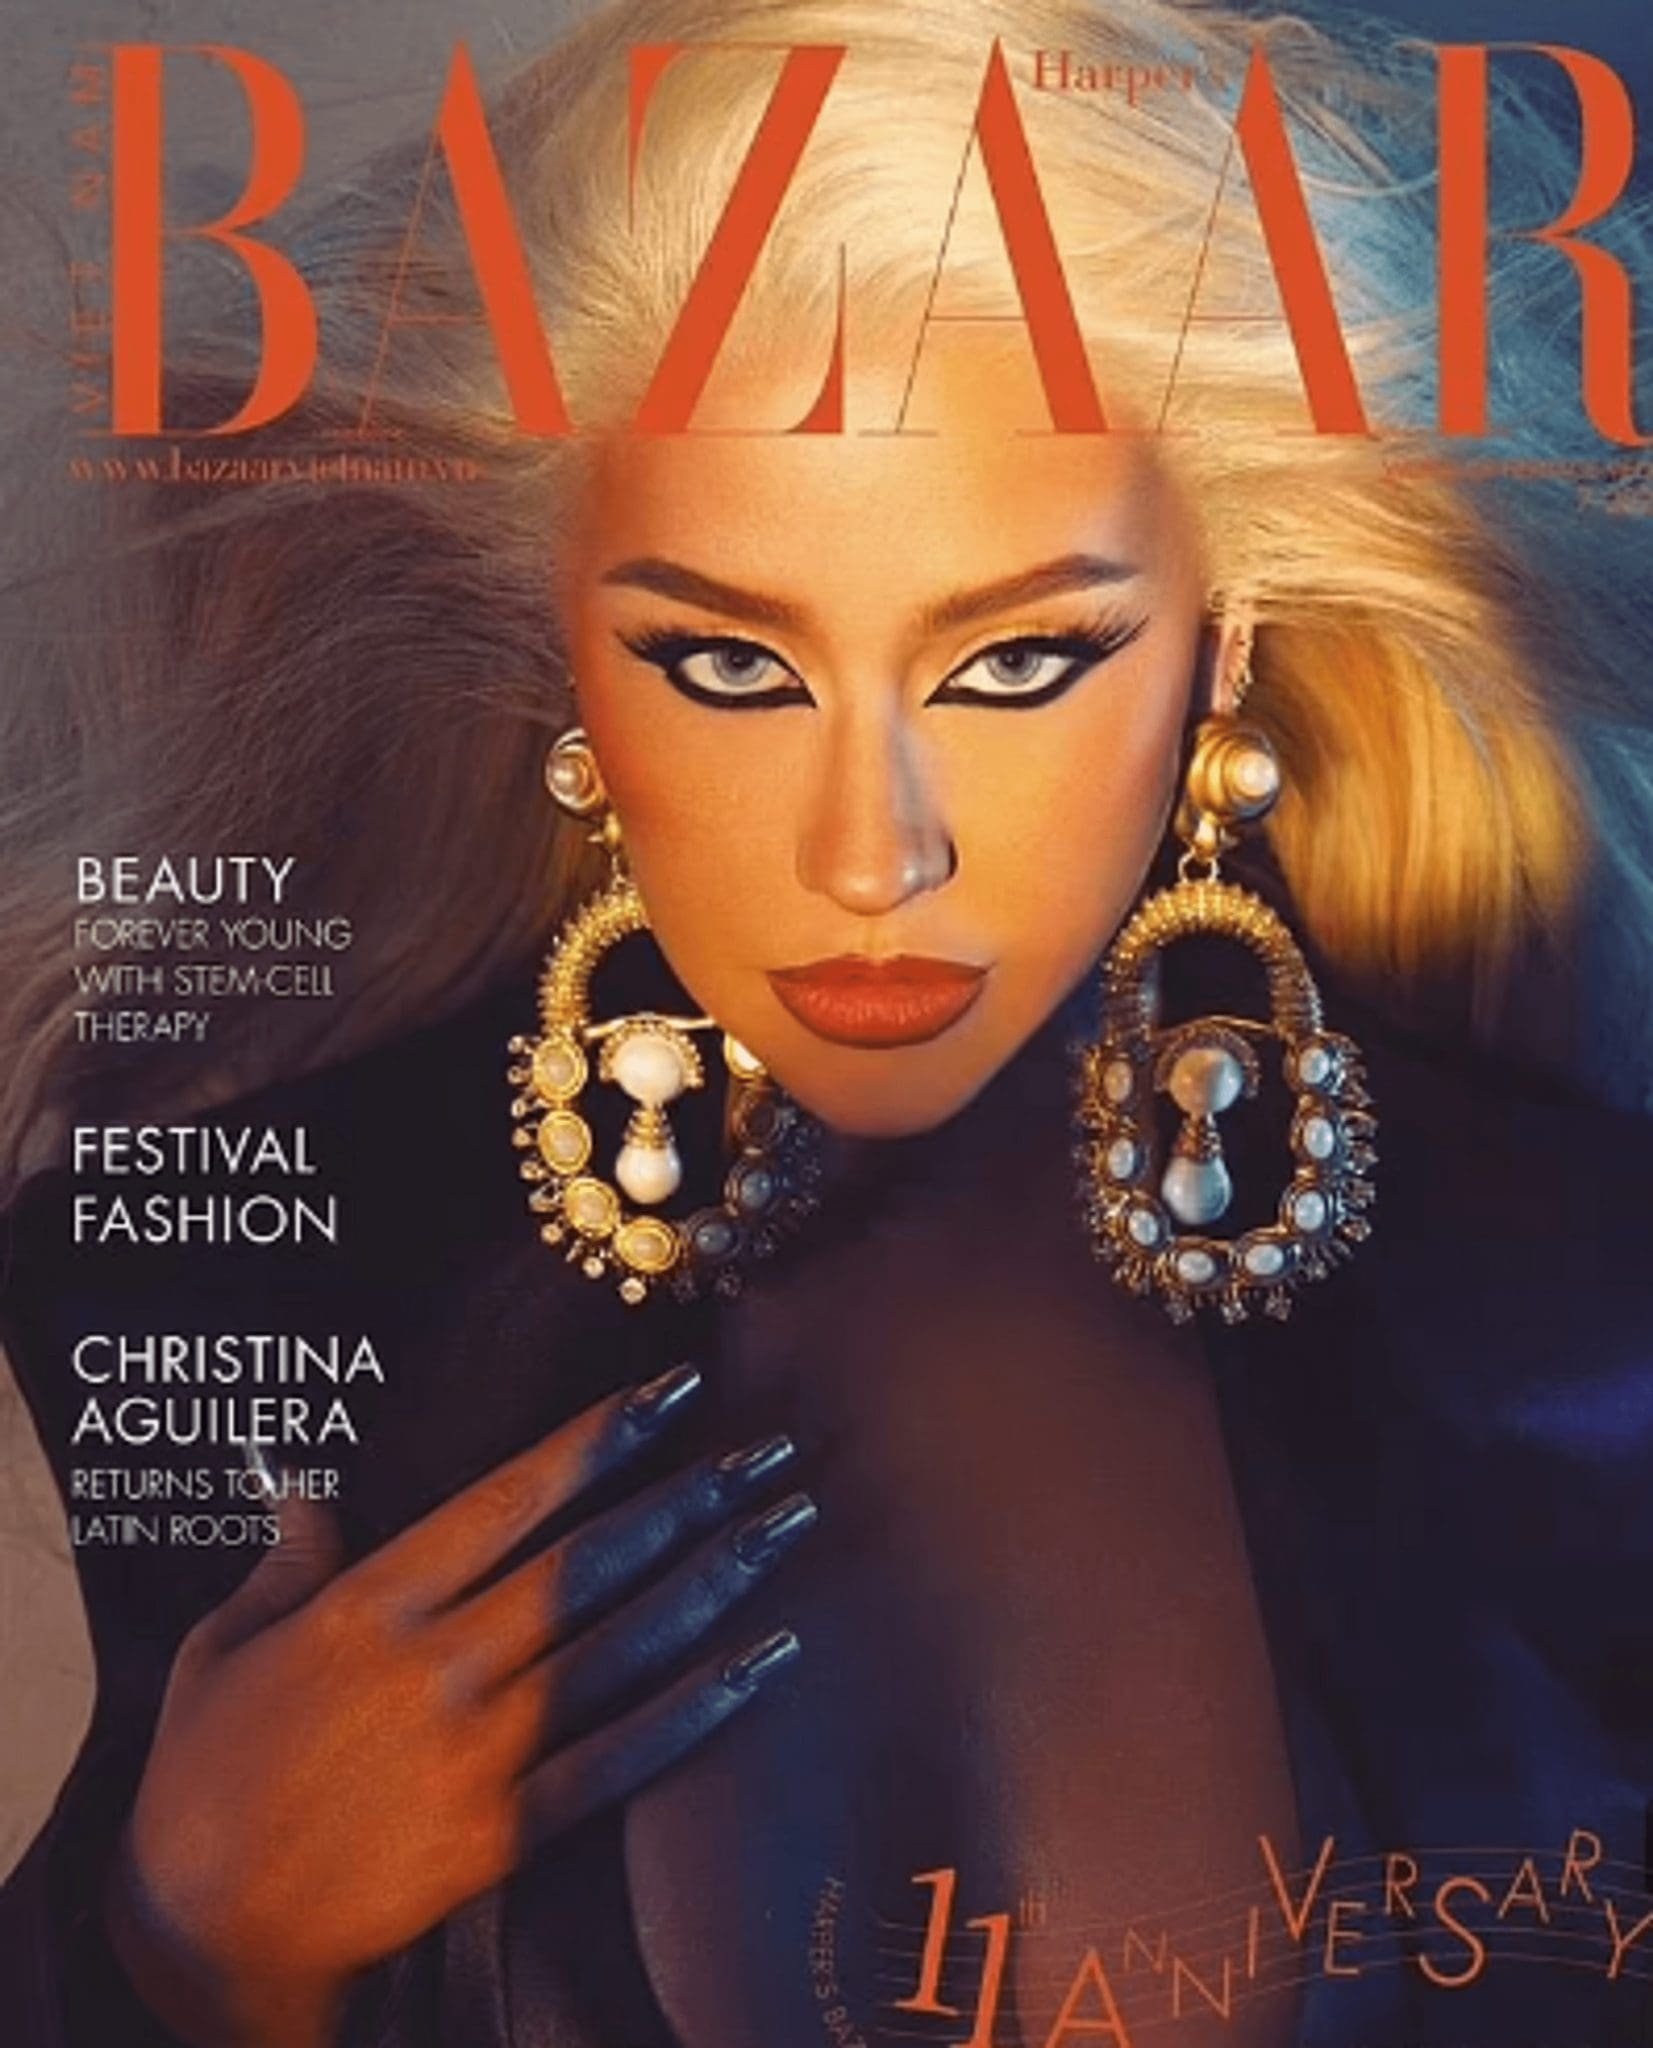 Christina Aguilera on the cover of Harper's Bazaar in a plunging neckline